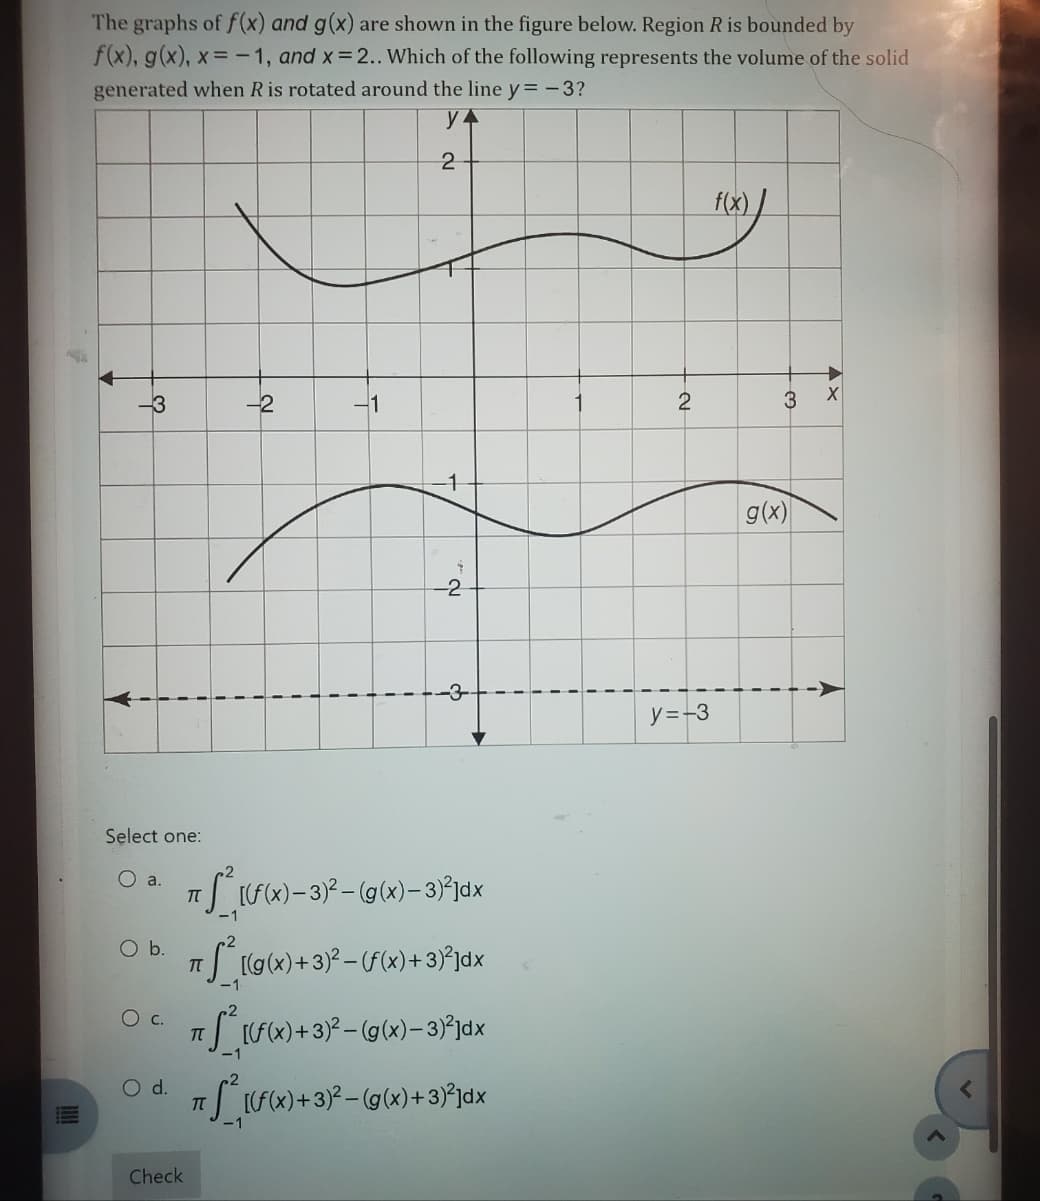 The graphs of f(x) and g(x) are shown in the figure below. Region R is bounded by
f(x), g(x), x= -1, and x=2.. Which of the following represents the volume of the solid
generated when R is rotated around the line y=-3?
у 4
-3
Select one:
O a.
O b.
O C.
O d.
Check
-2
π
1
πT
1
i
2
1
-2
T
7 S² [(f(x)- 3)² – (g(x)-3)²]dx
-3-
[(g(x) + 3)² – (f(x)+ 3)²]dx
((x) + 3)²-(g(x)-3)-²x
T
π S²_[(f(x) + 3)² – (g(x)+3)³]dx
-1
i
1
2
y=-3
f(x)/
3
g(x)
X